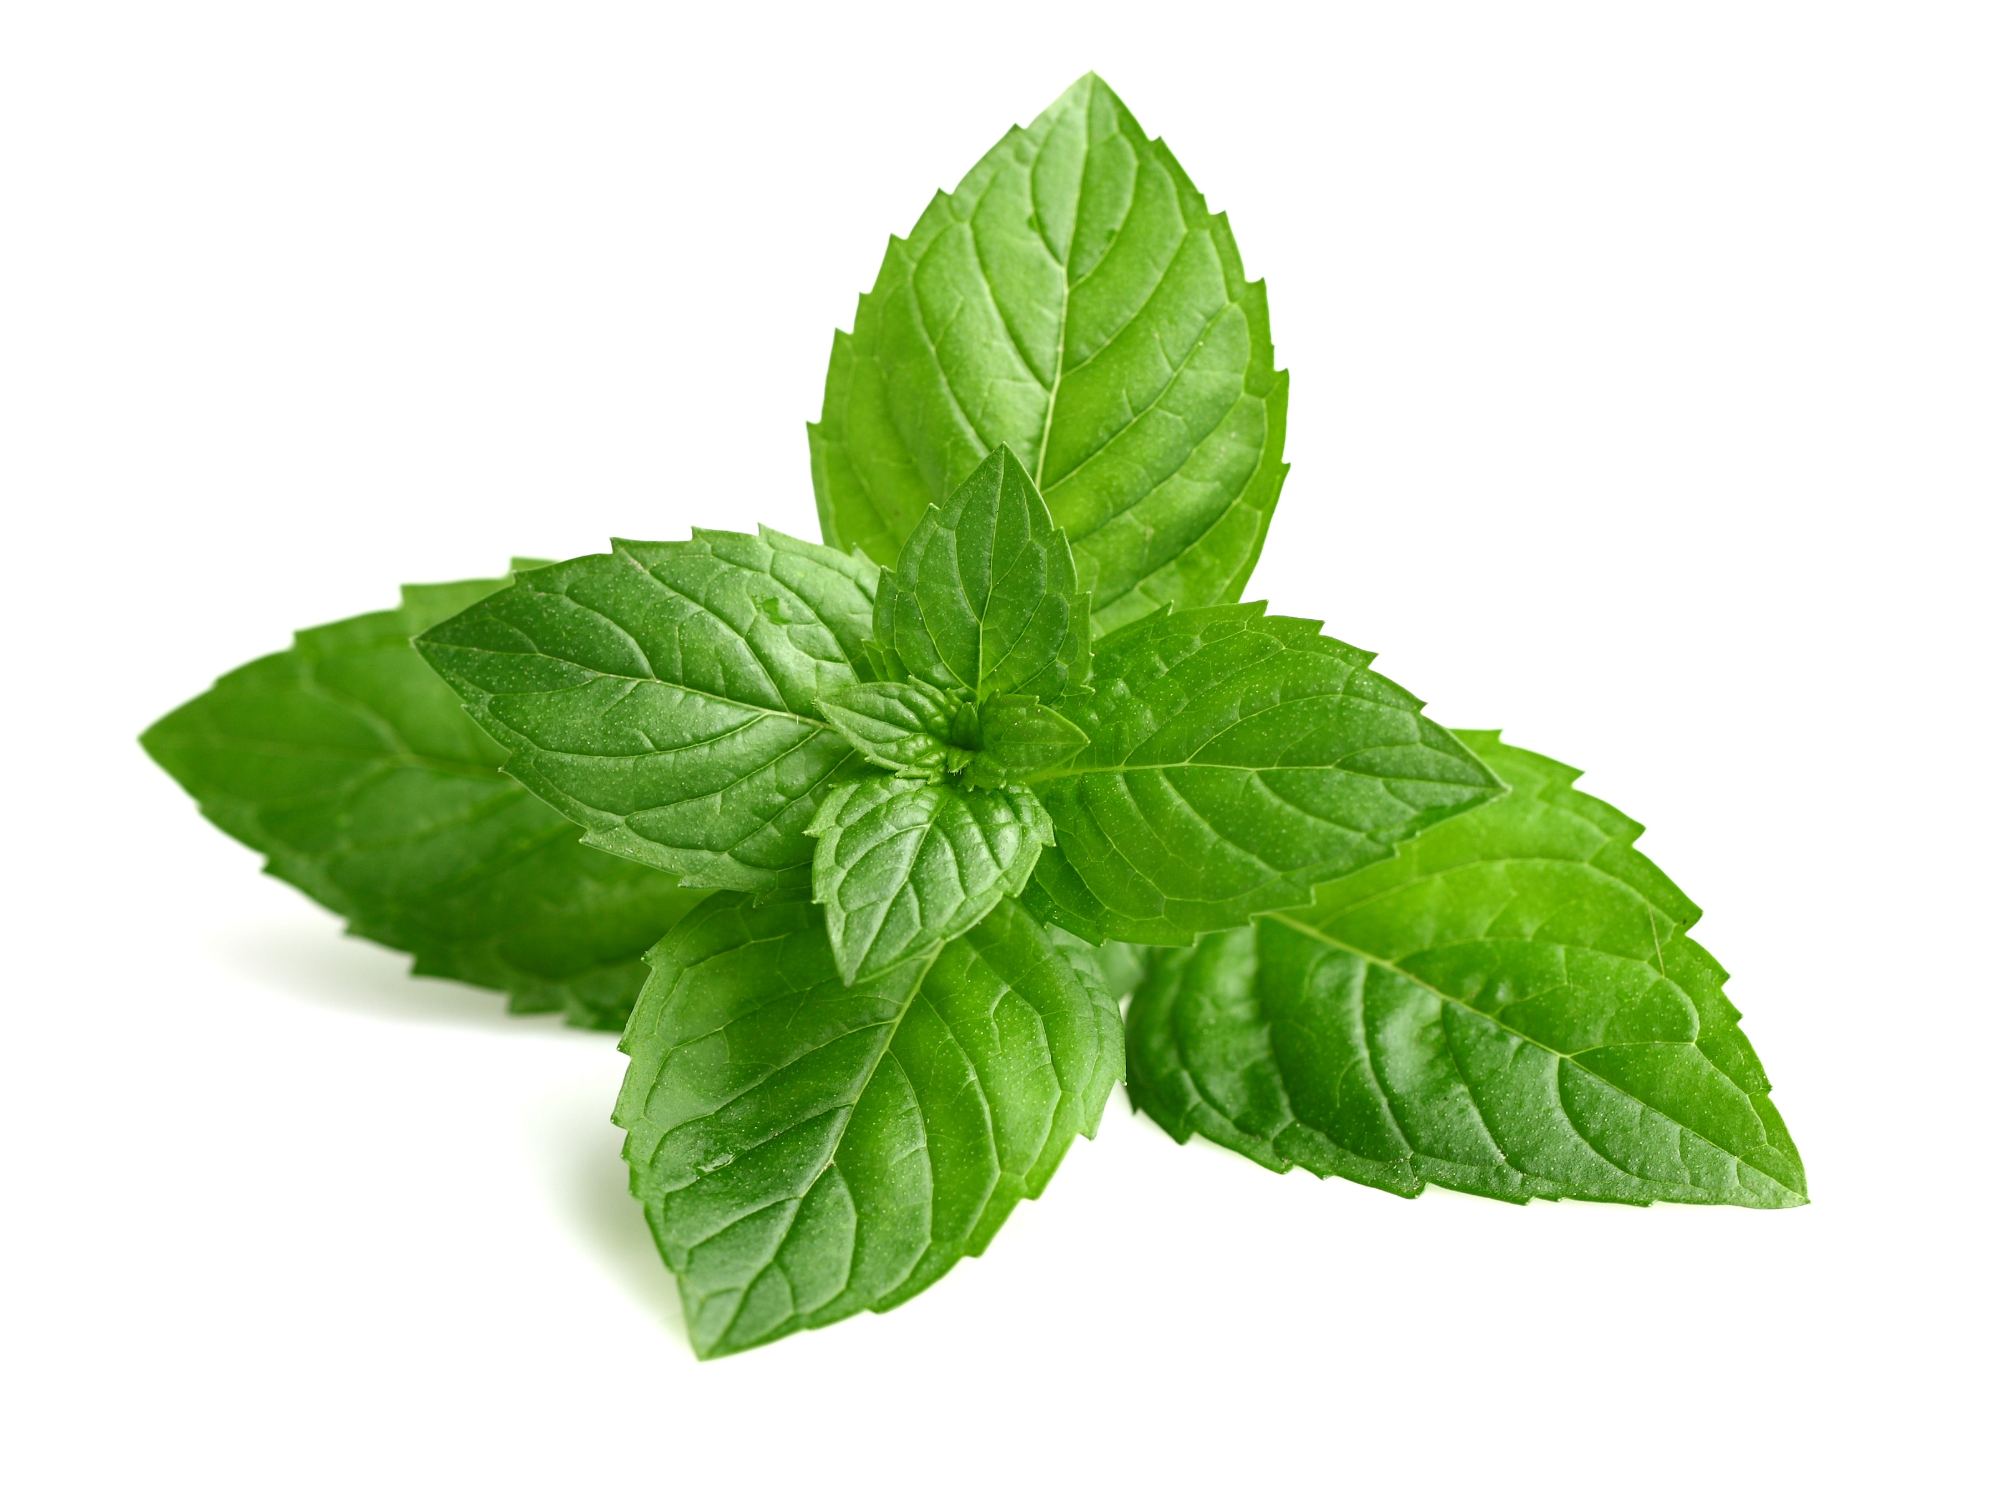 4. Peppermint: The Refreshing Revitalizer